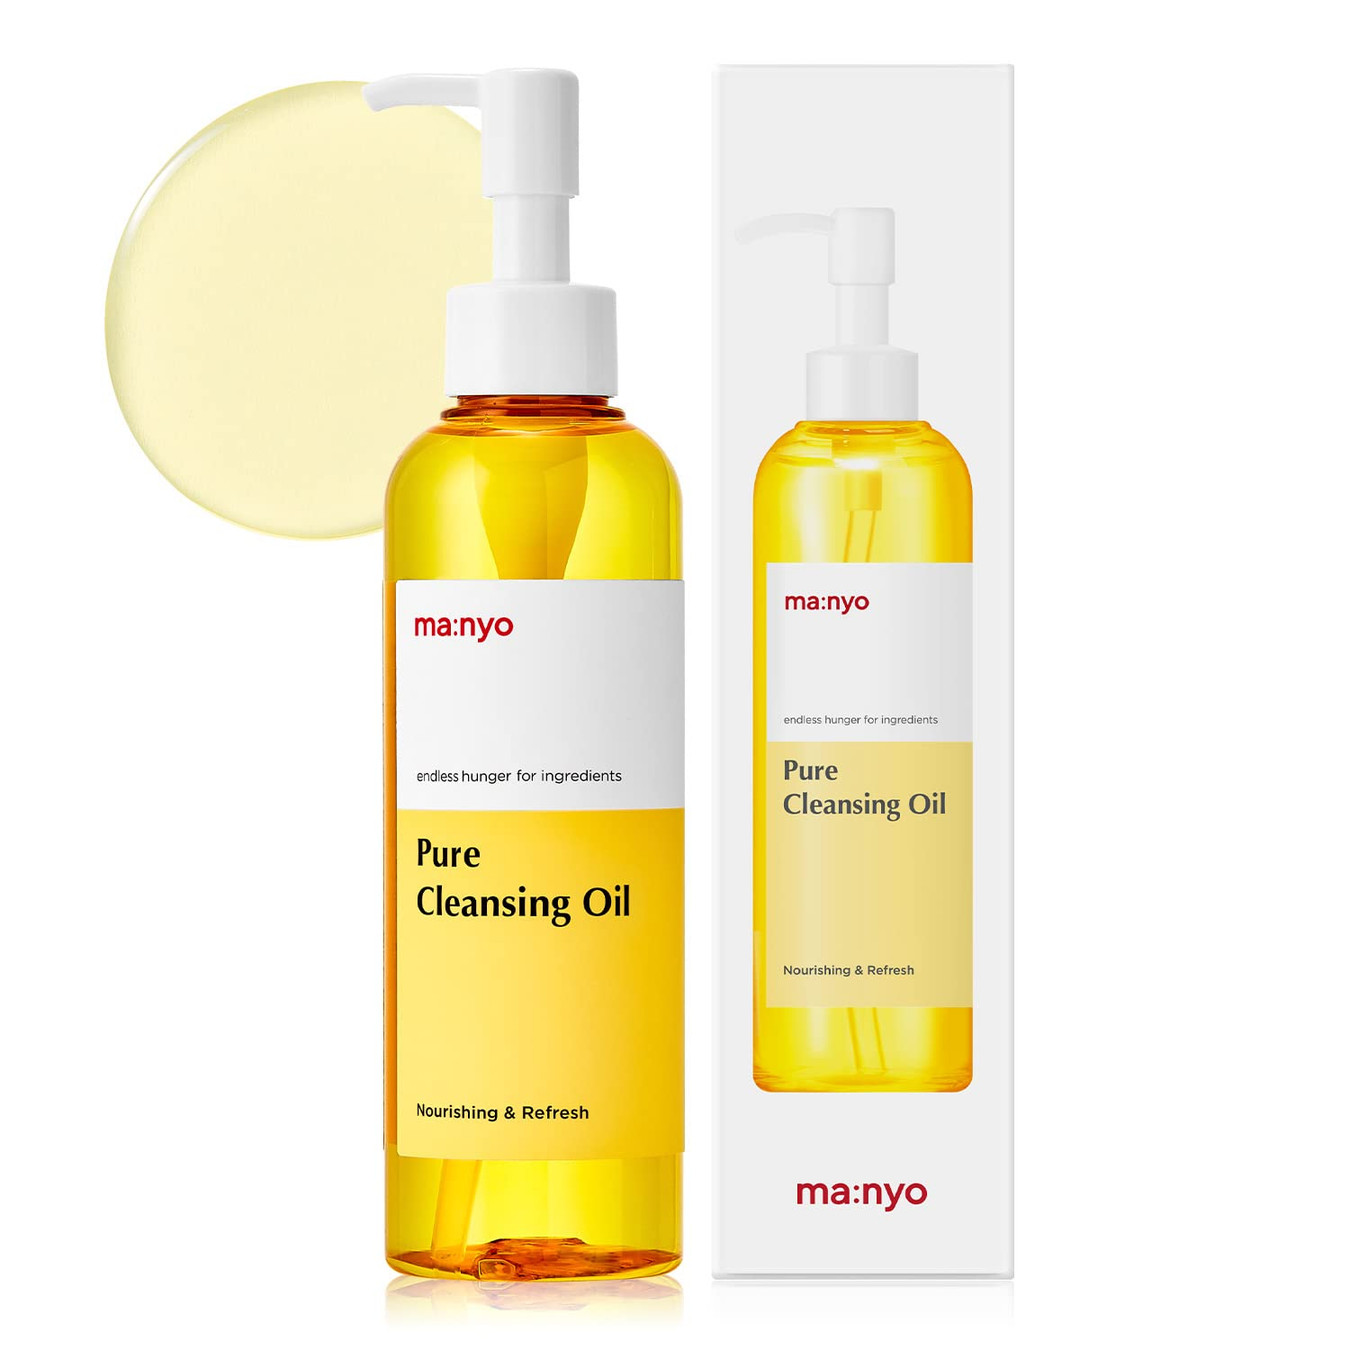 ma:nyo Pure Cleansing Oil (6.7 oz)